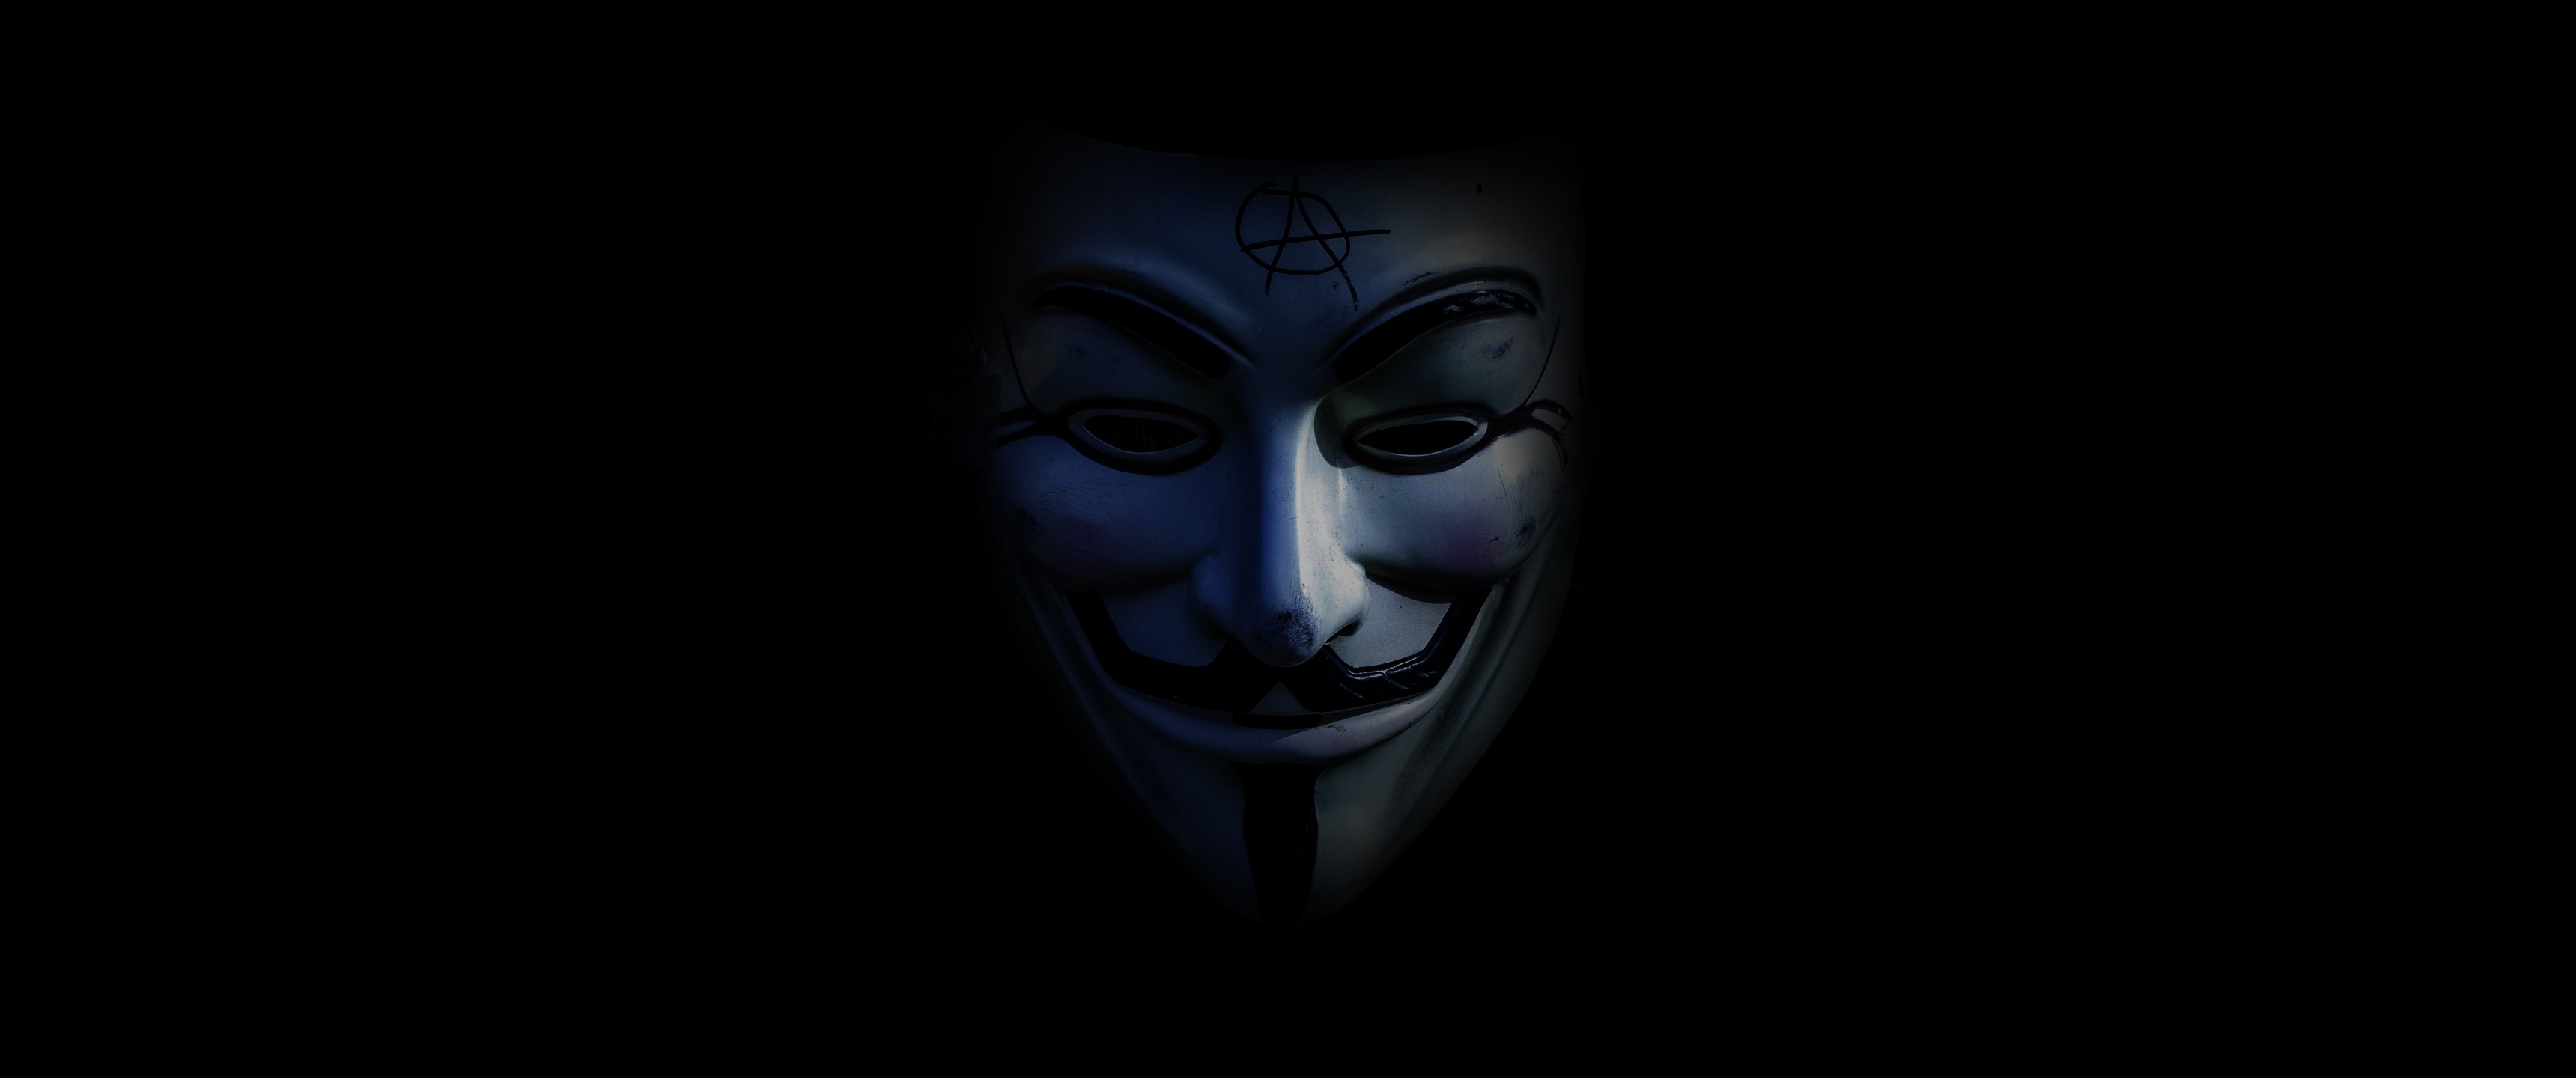 Anonymous 4K wallpaper by MustaphaSeven  Download on ZEDGE  a63d